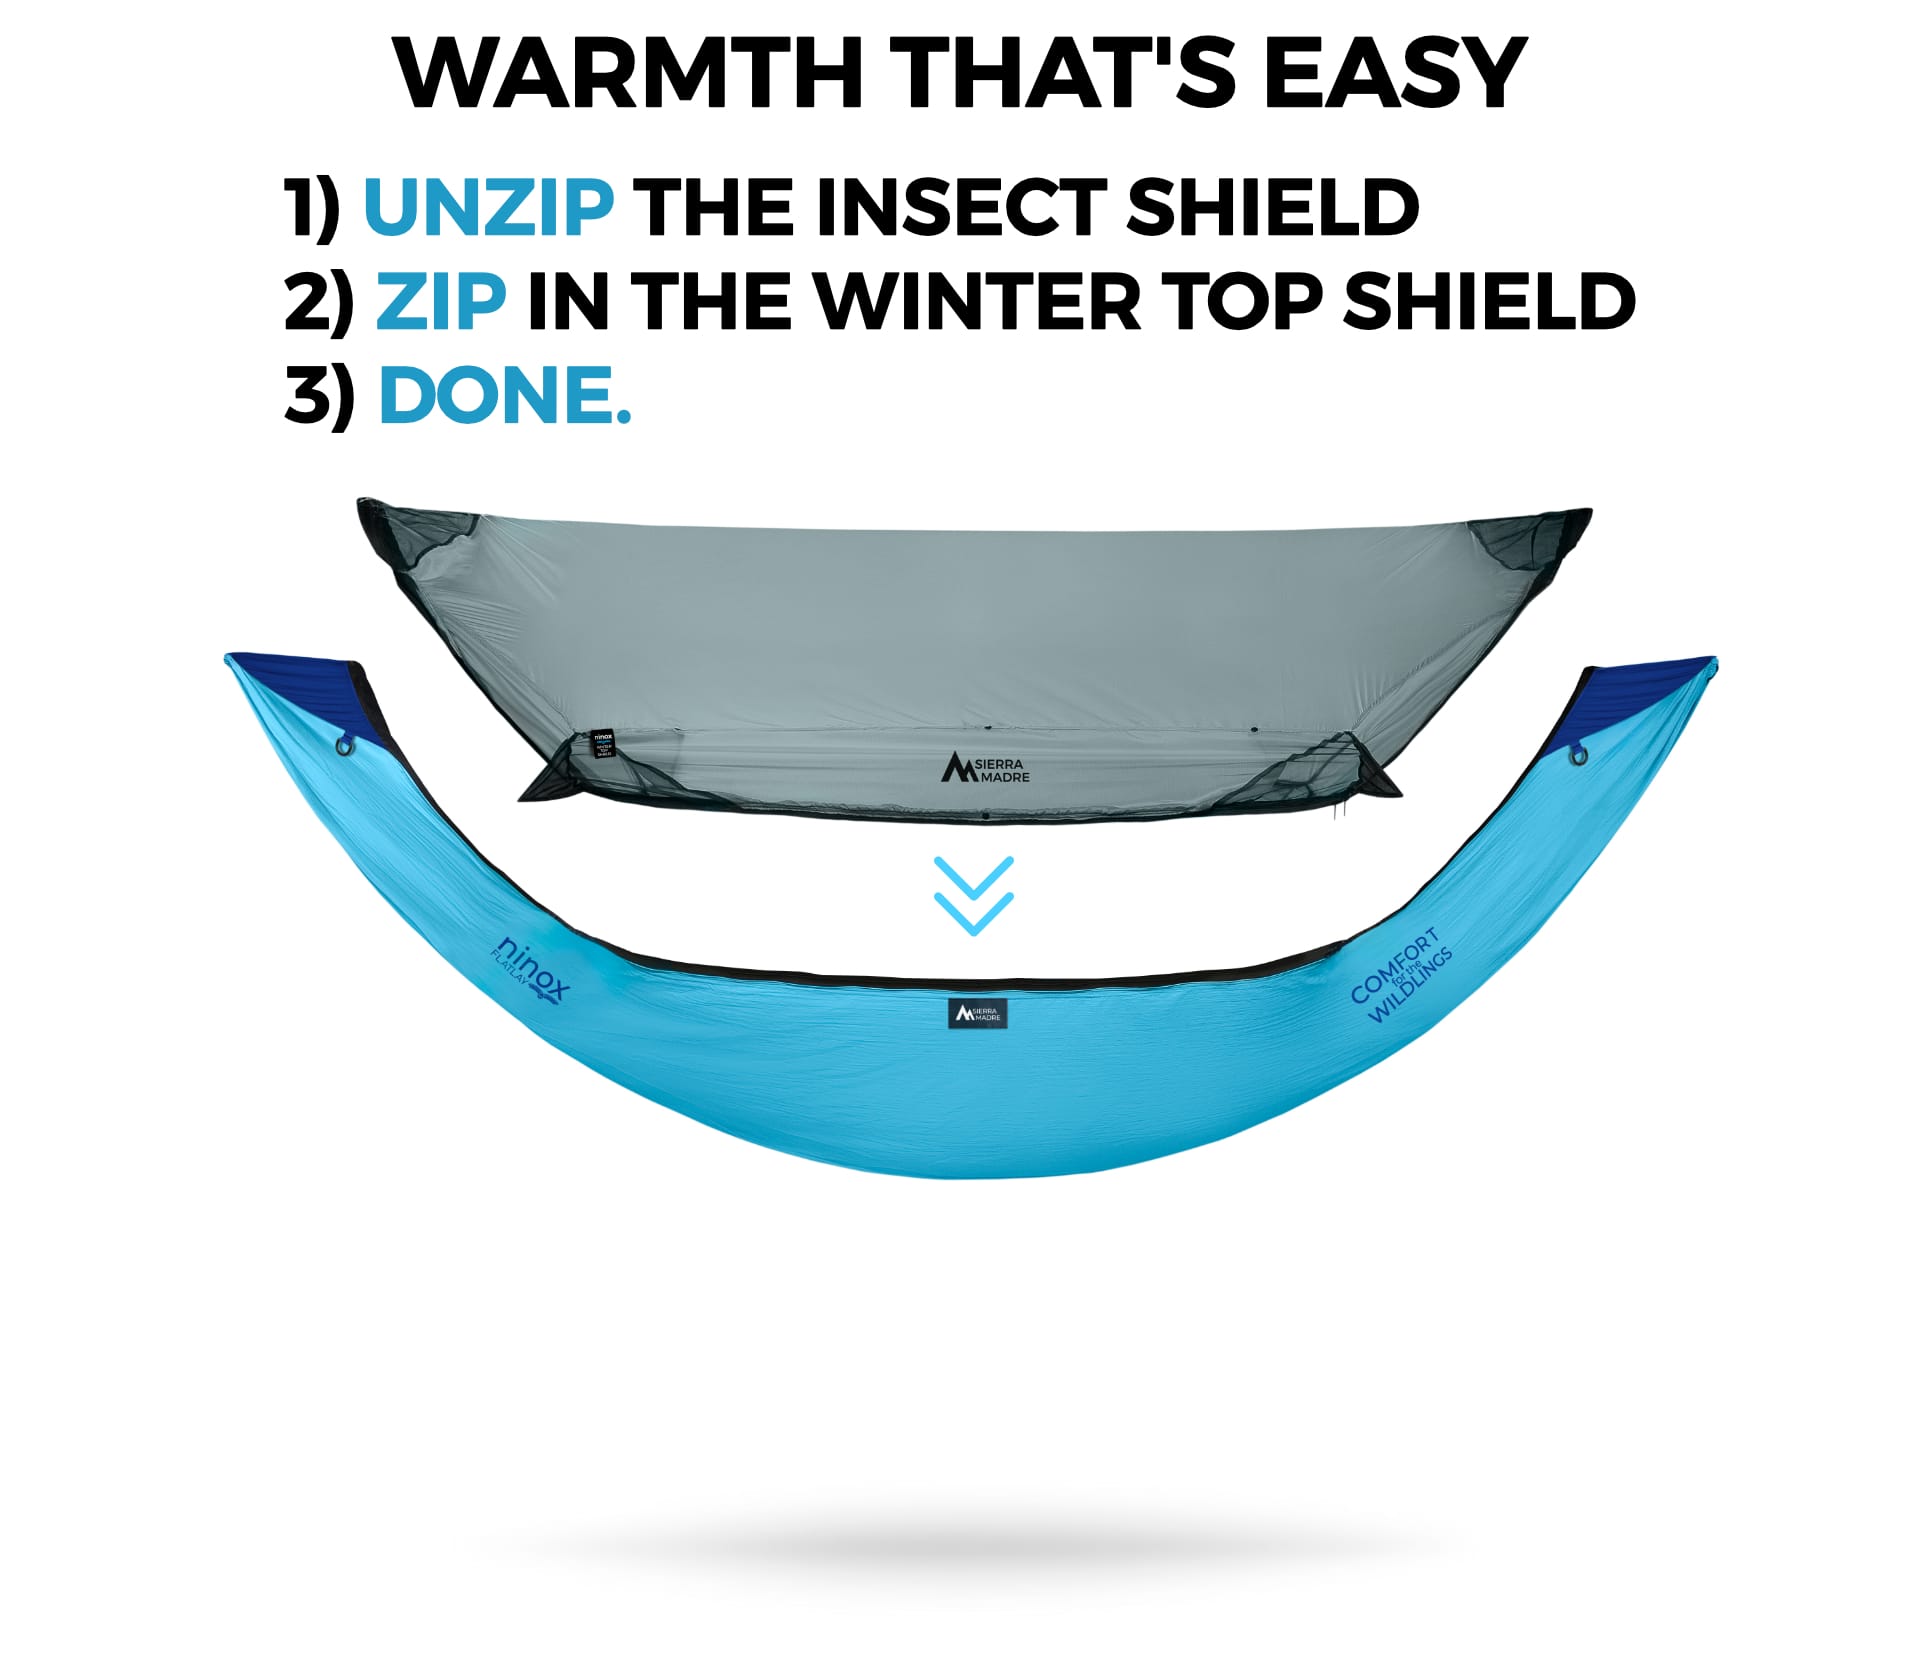 The Ninox Winter Top Shield mates perfectly to your Ninox Hammock, giving you 4th season protection instantly!